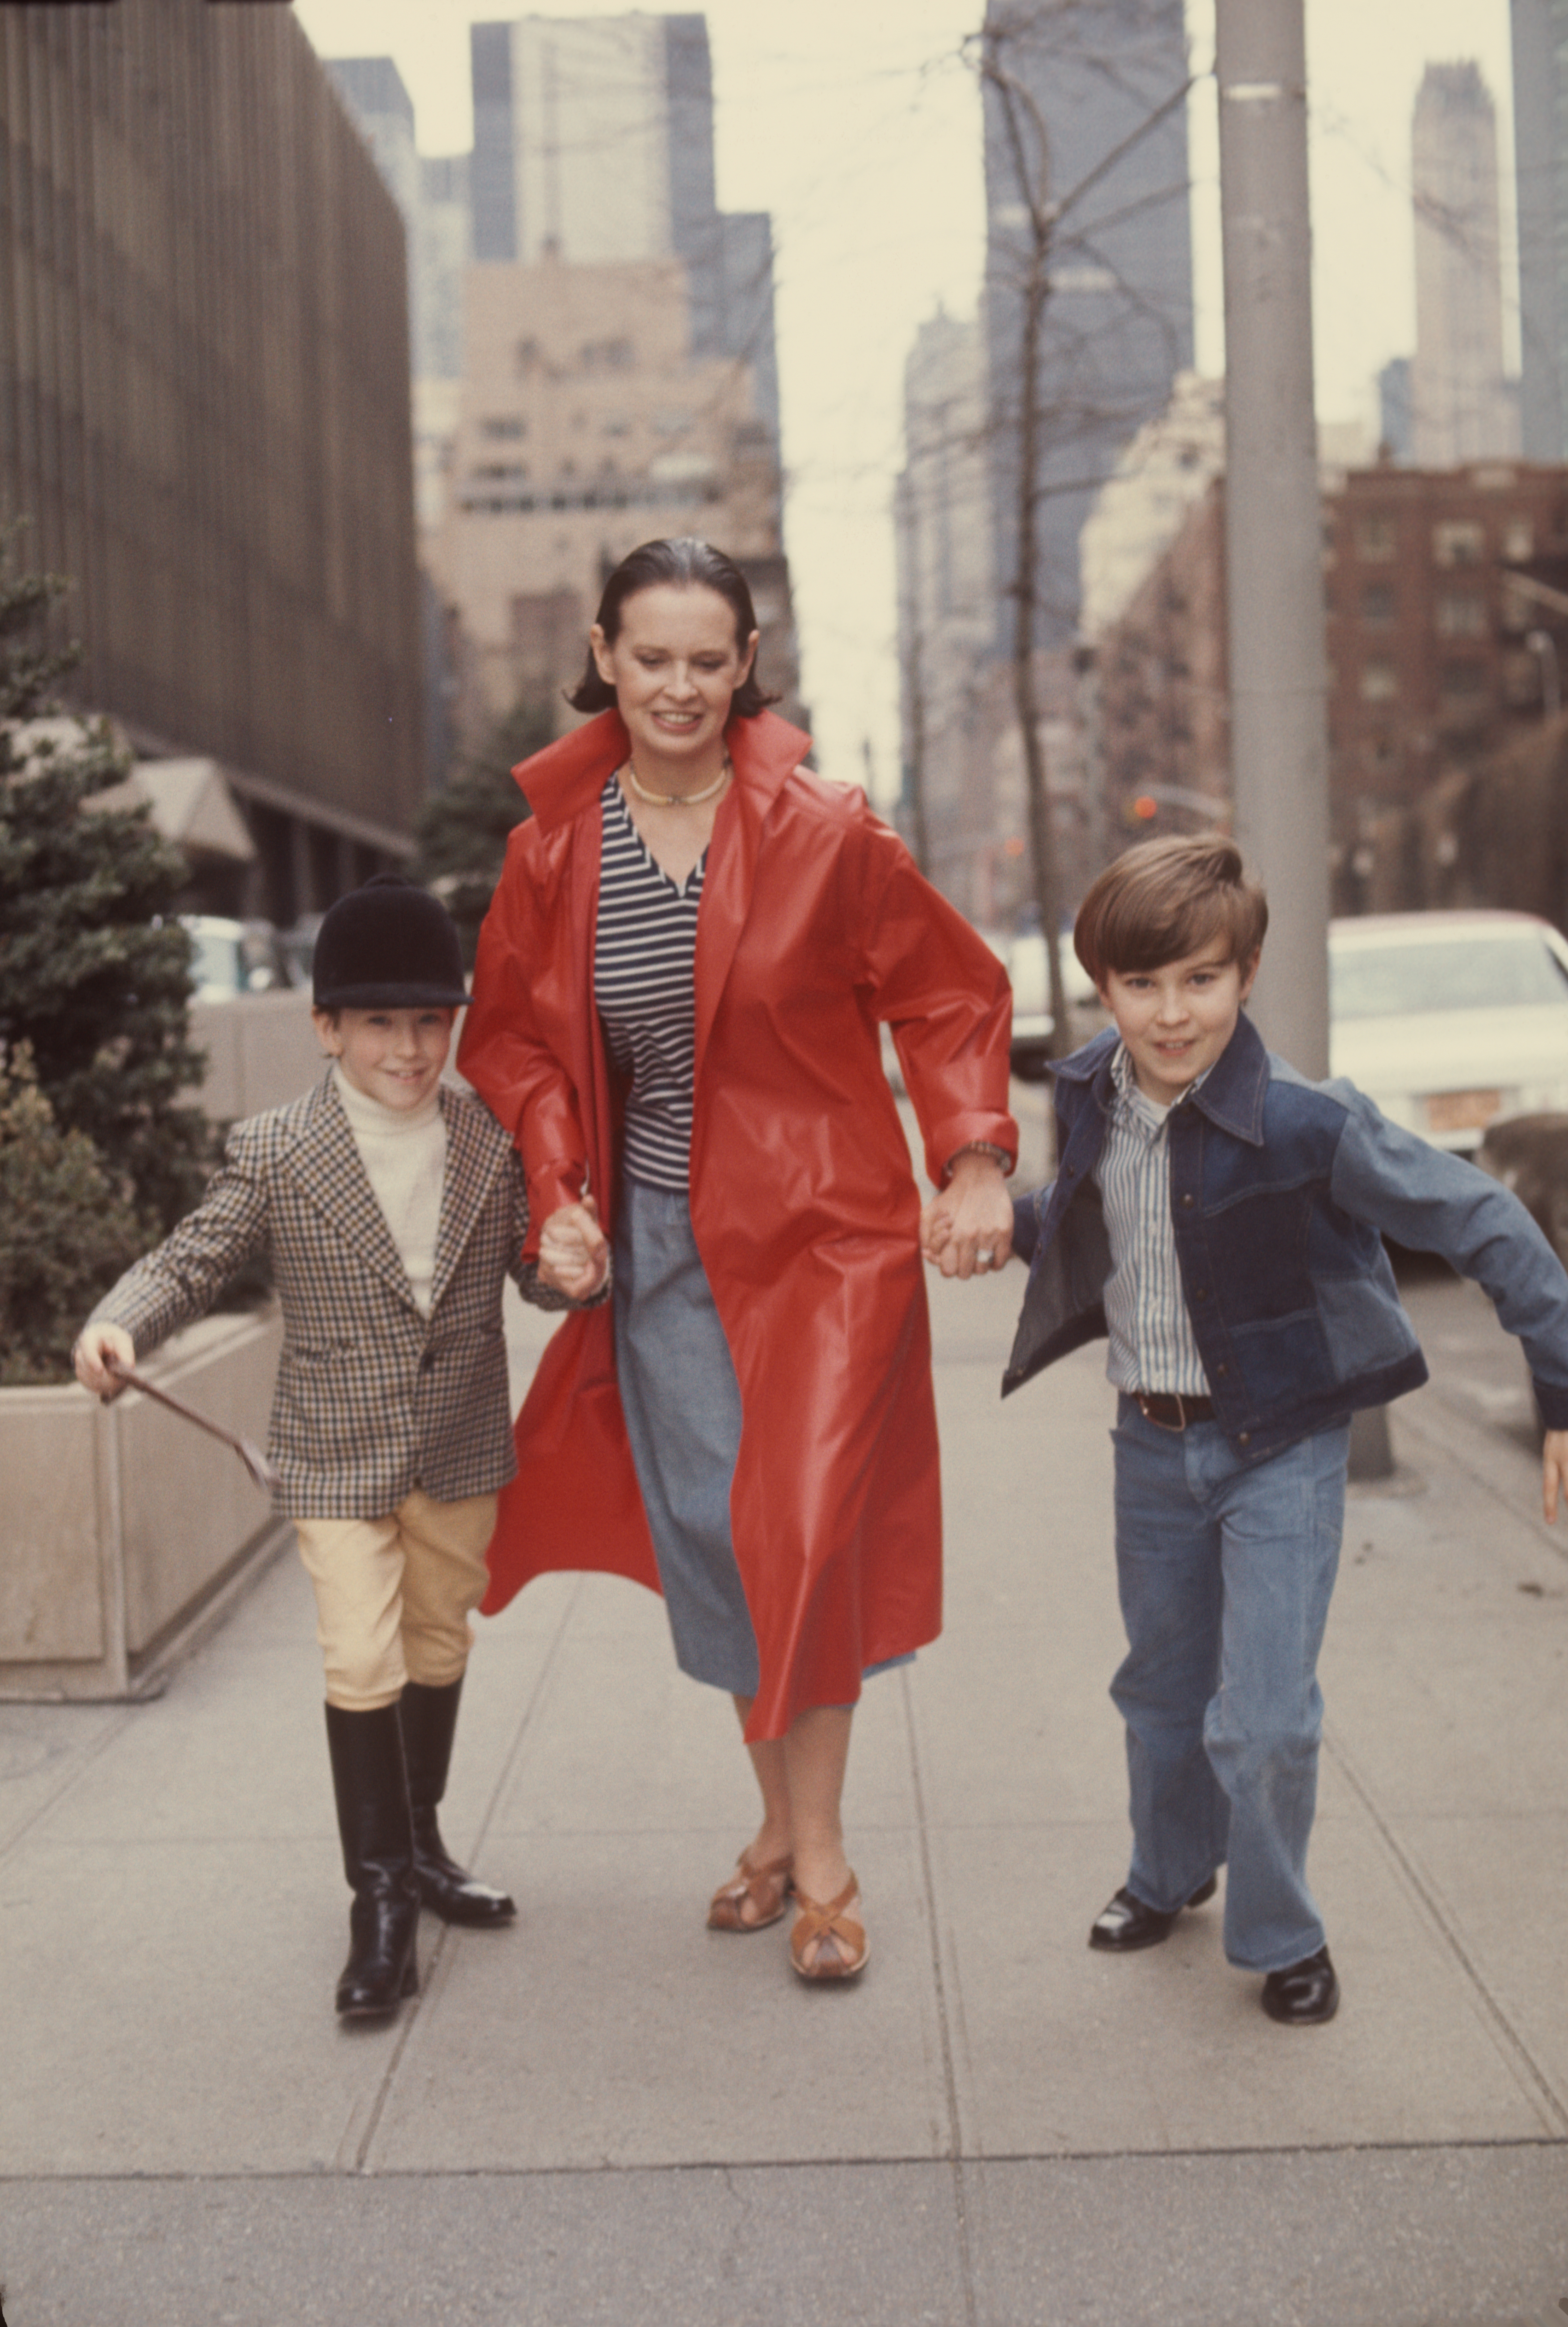 Anderson Cooper, Gloria Vanderbilt, and Carter Cooper in New York City on March 1976 | Source: Getty Images